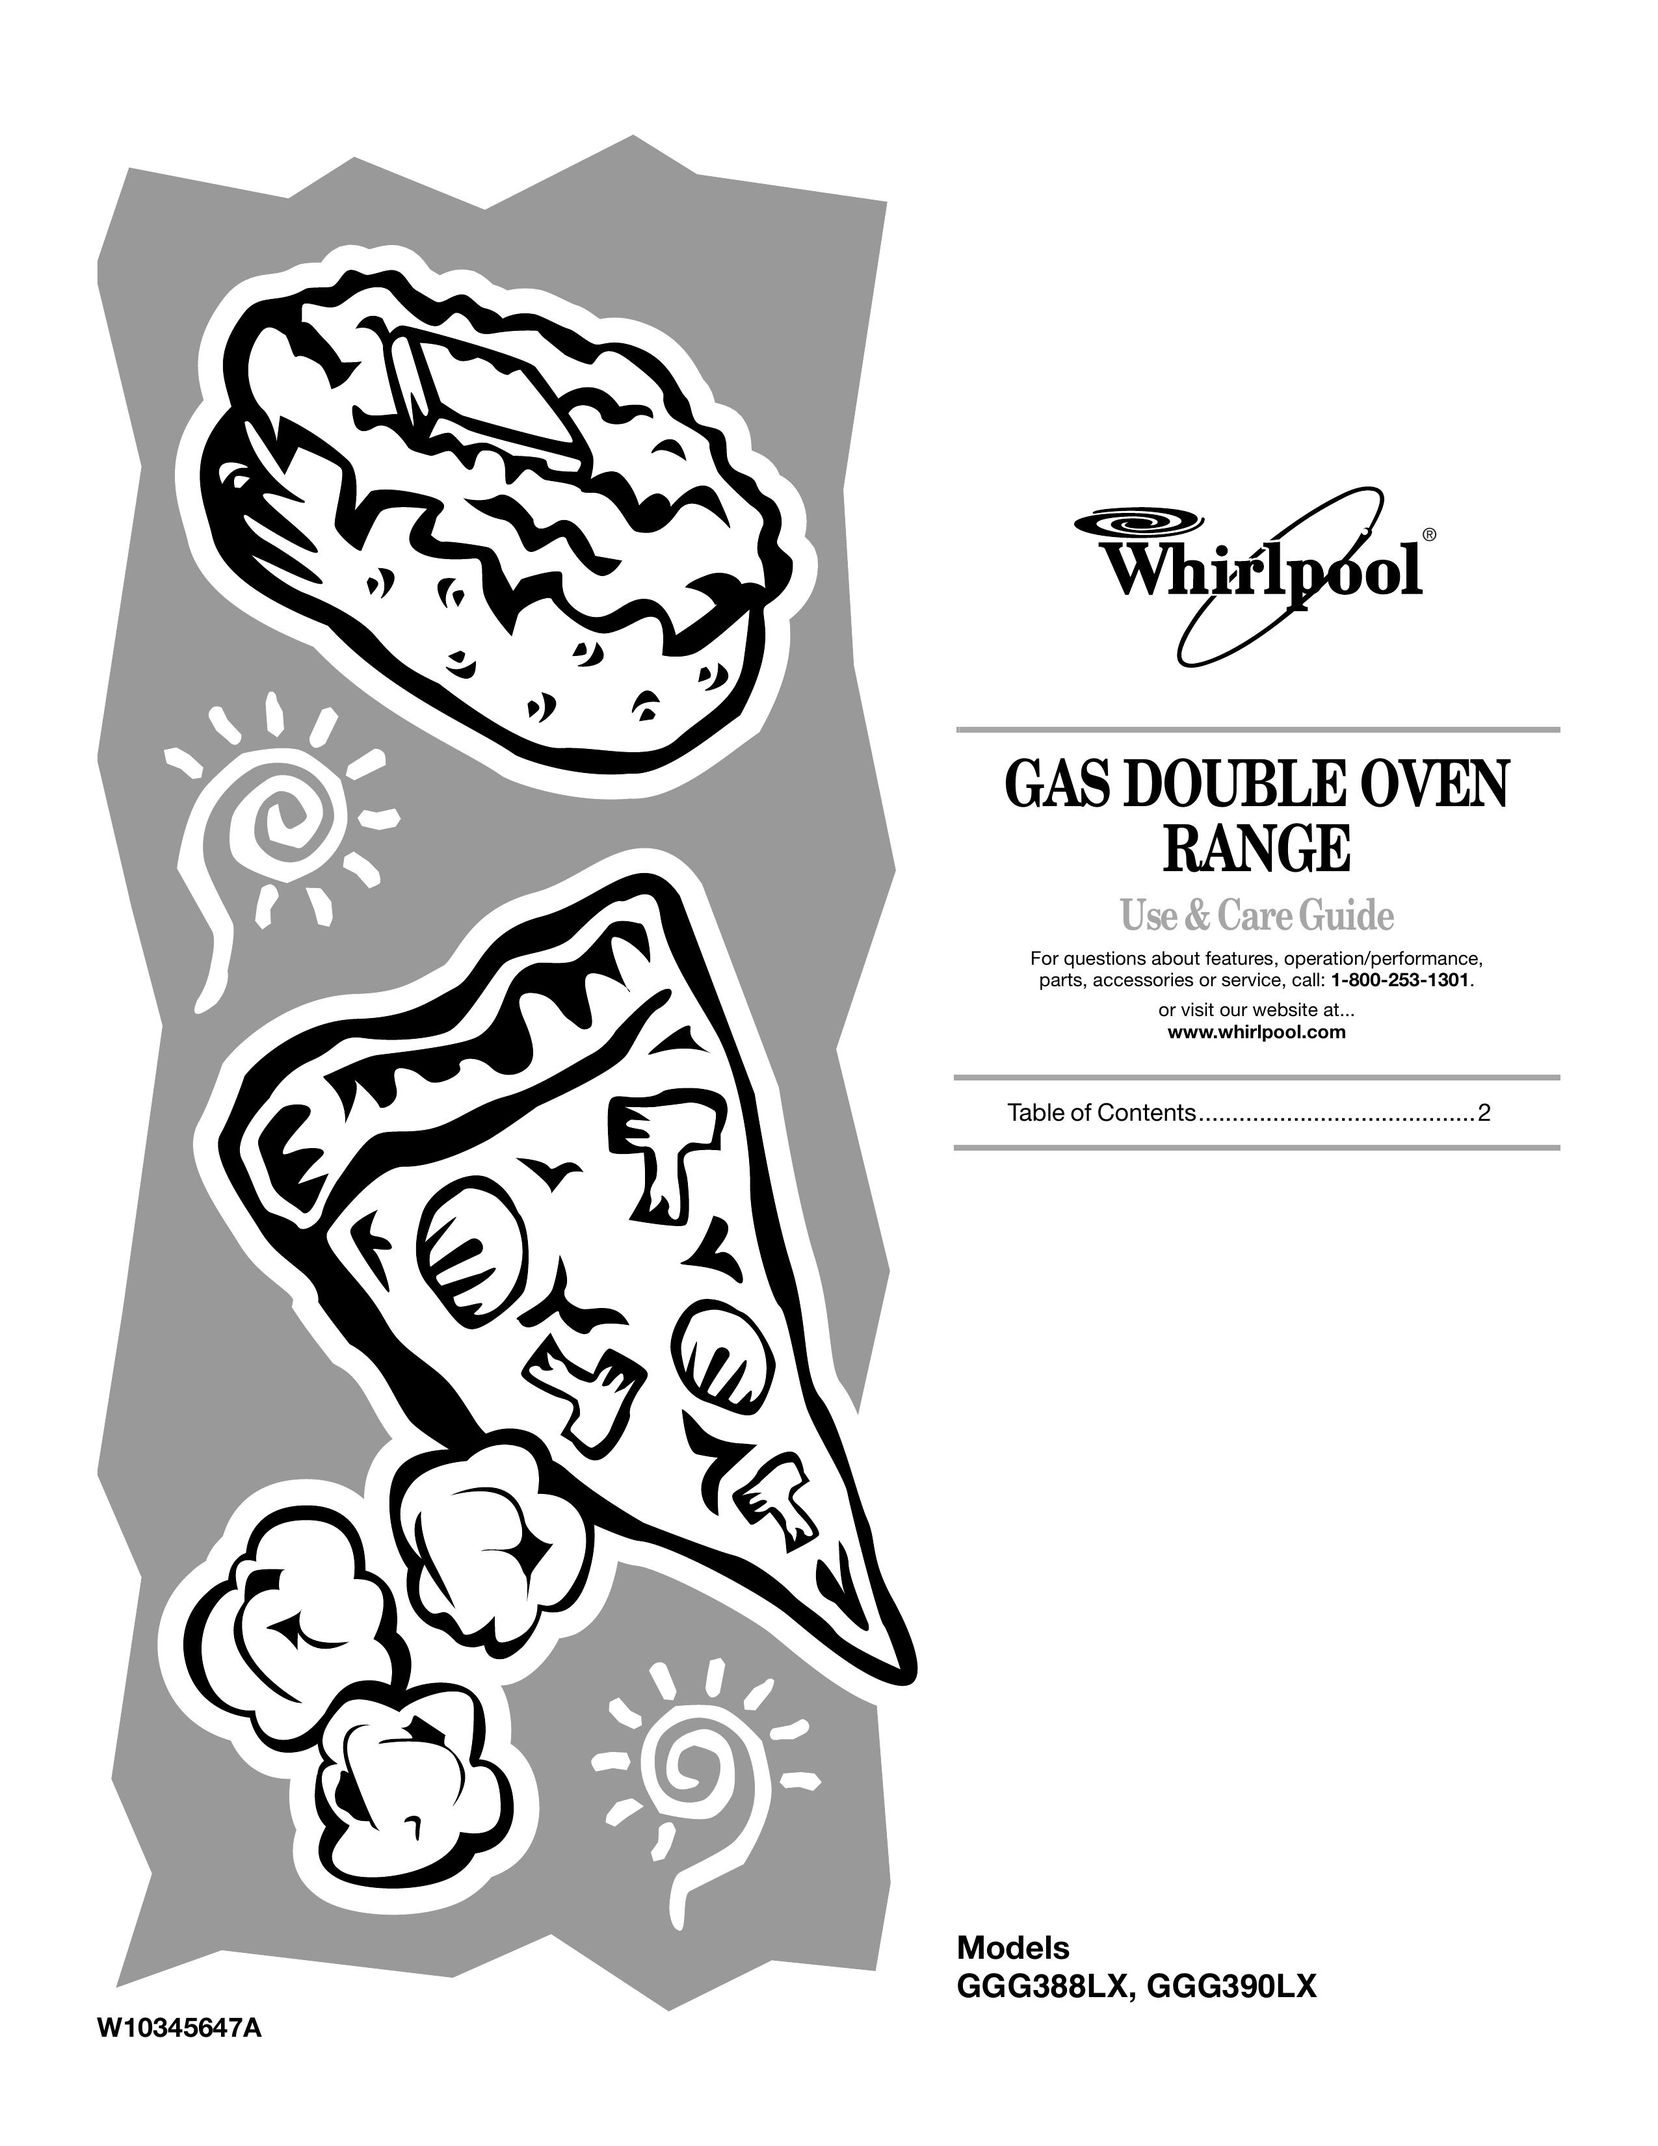 Whirlpool GGG388LX Double Oven User Manual